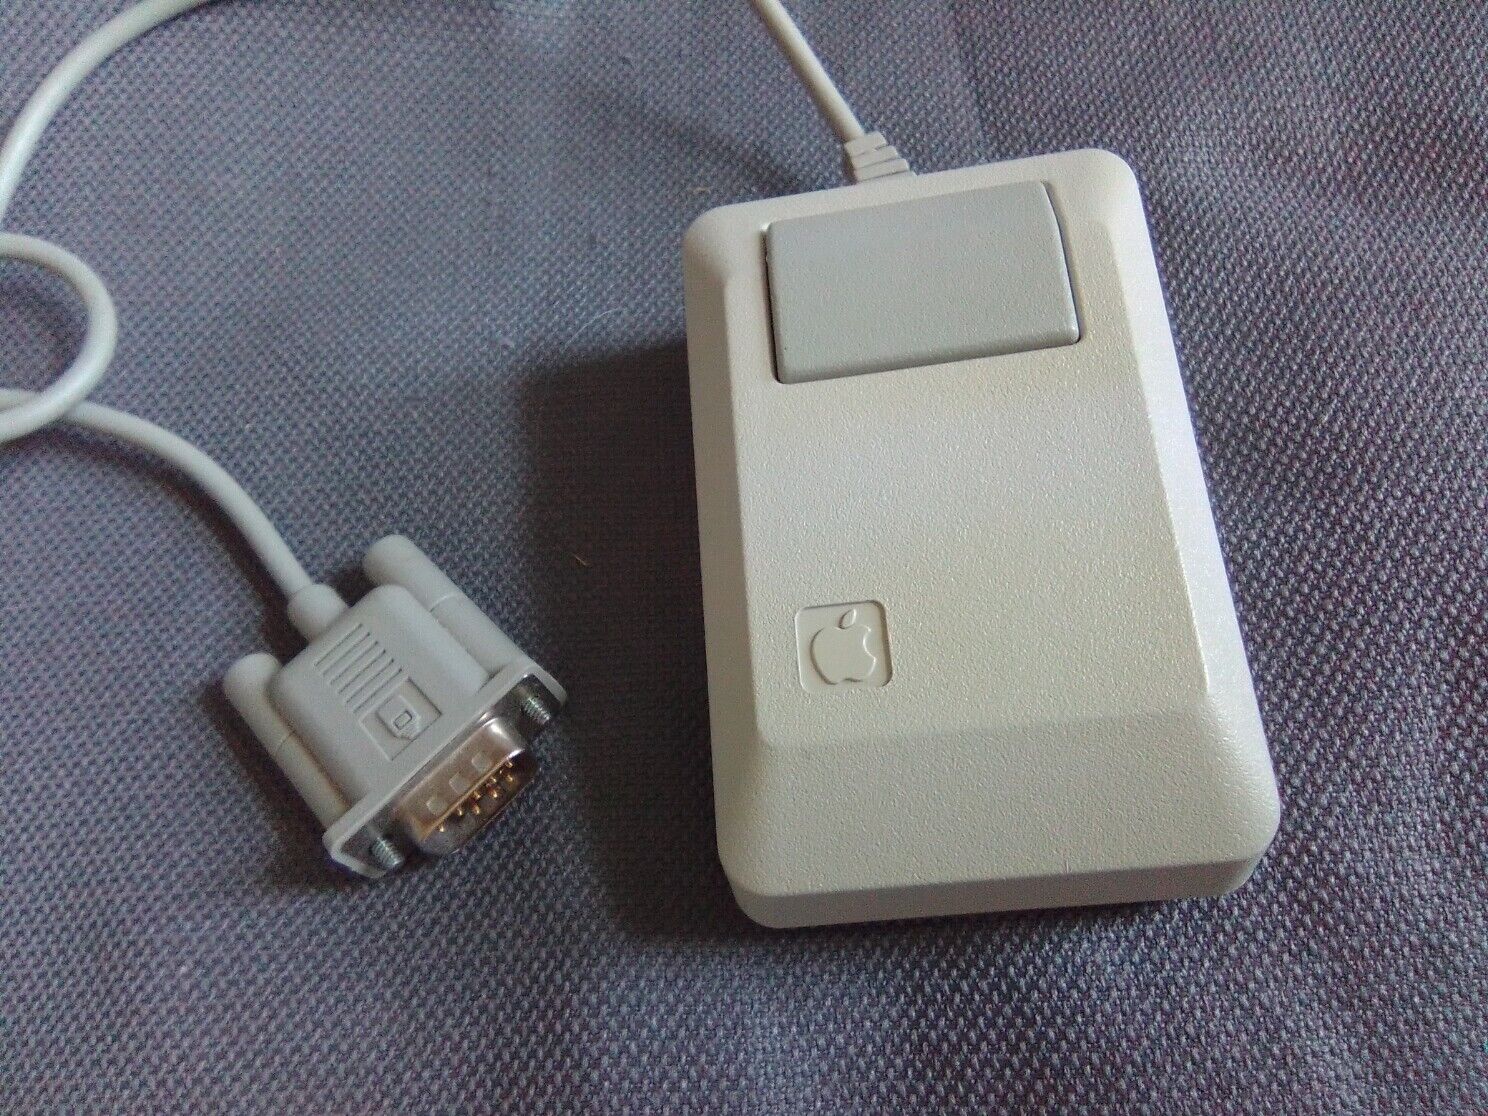 Apple M0100 Mouse *** for early 128K / 512K Macintosh Computers.